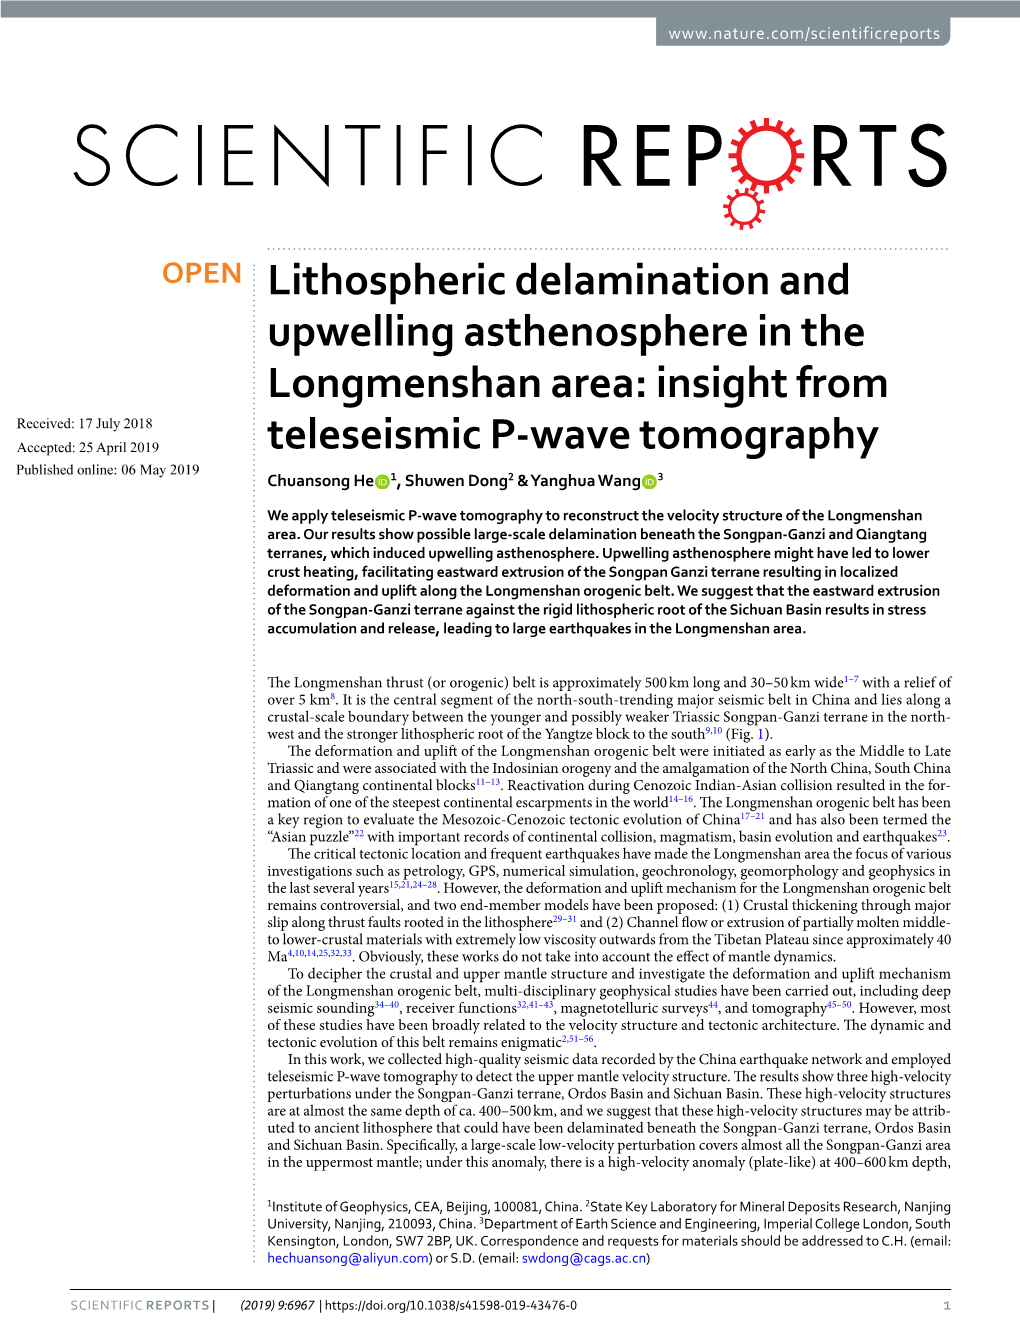 Lithospheric Delamination and Upwelling Asthenosphere in The